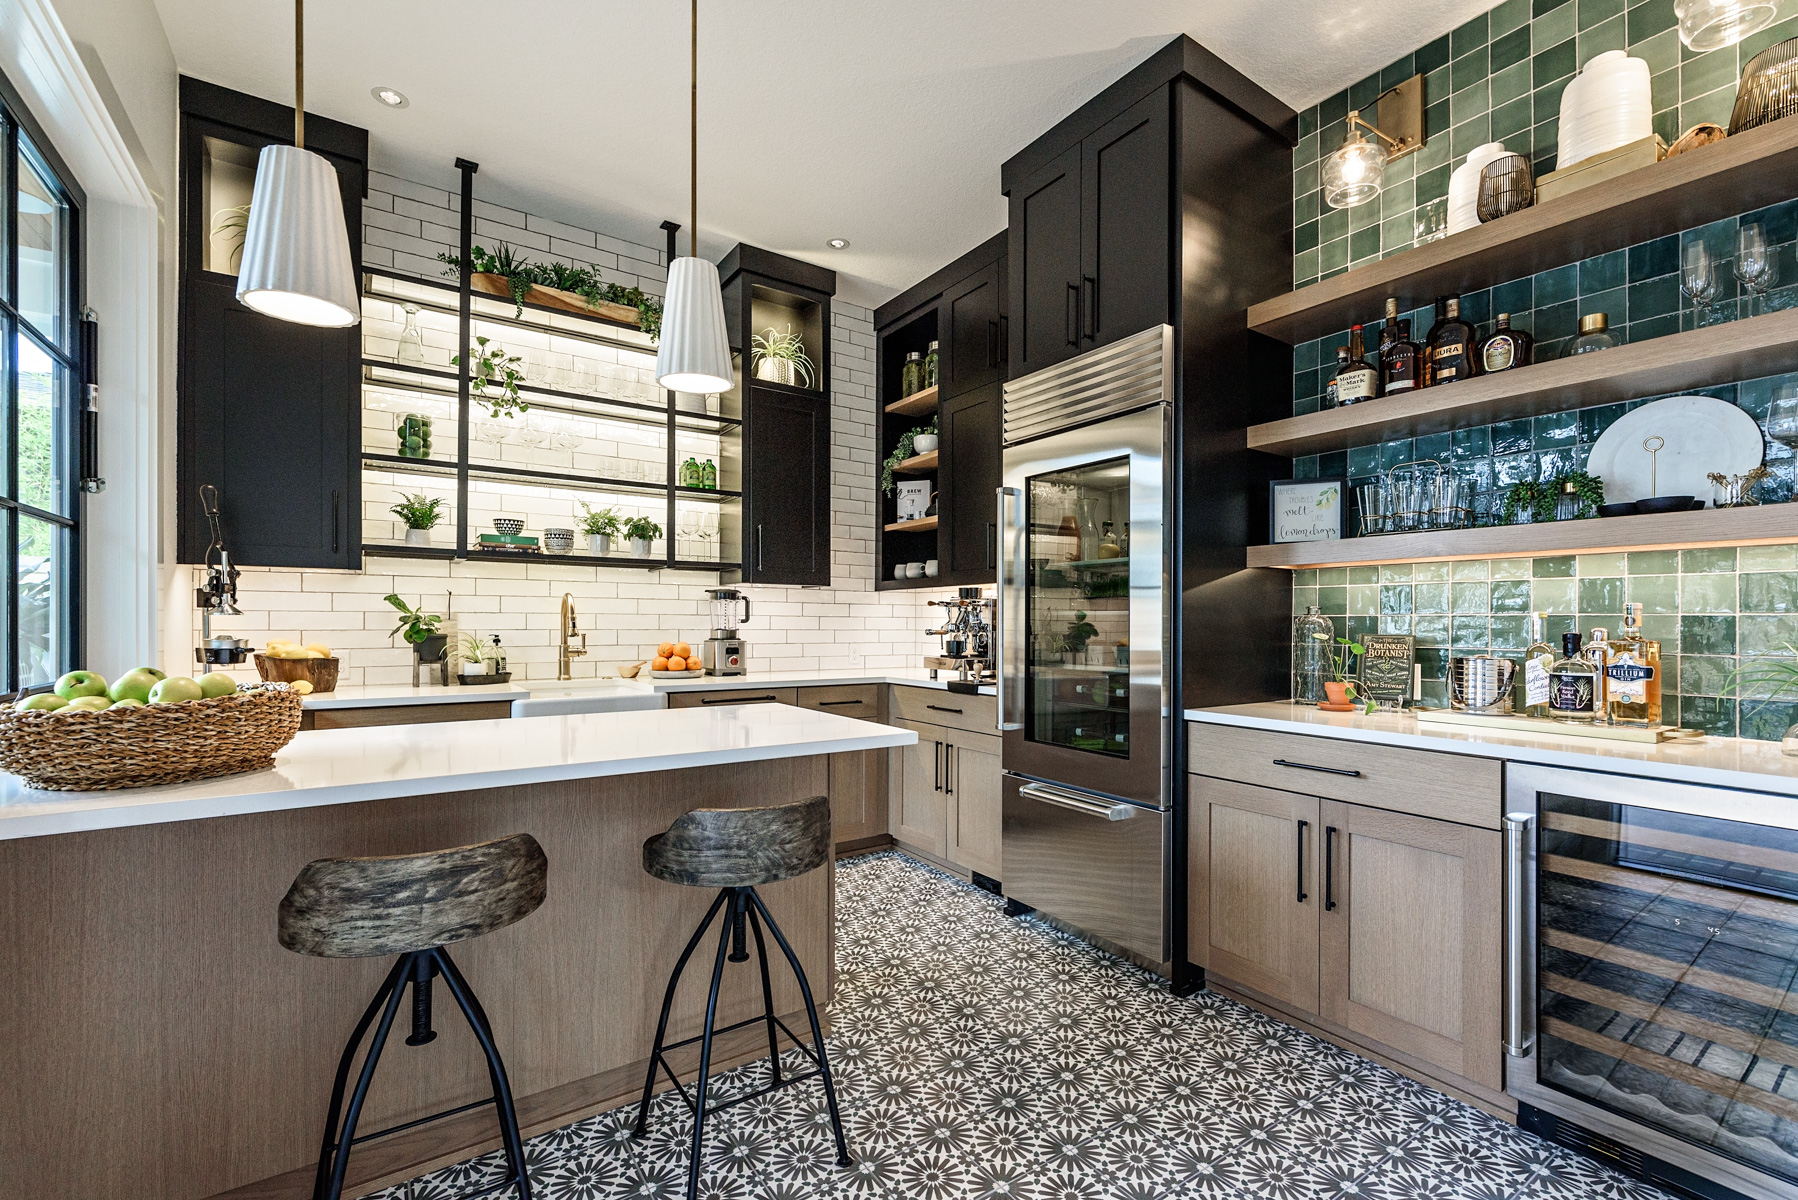 What Homeowners Want From Their Kitchens in 2021